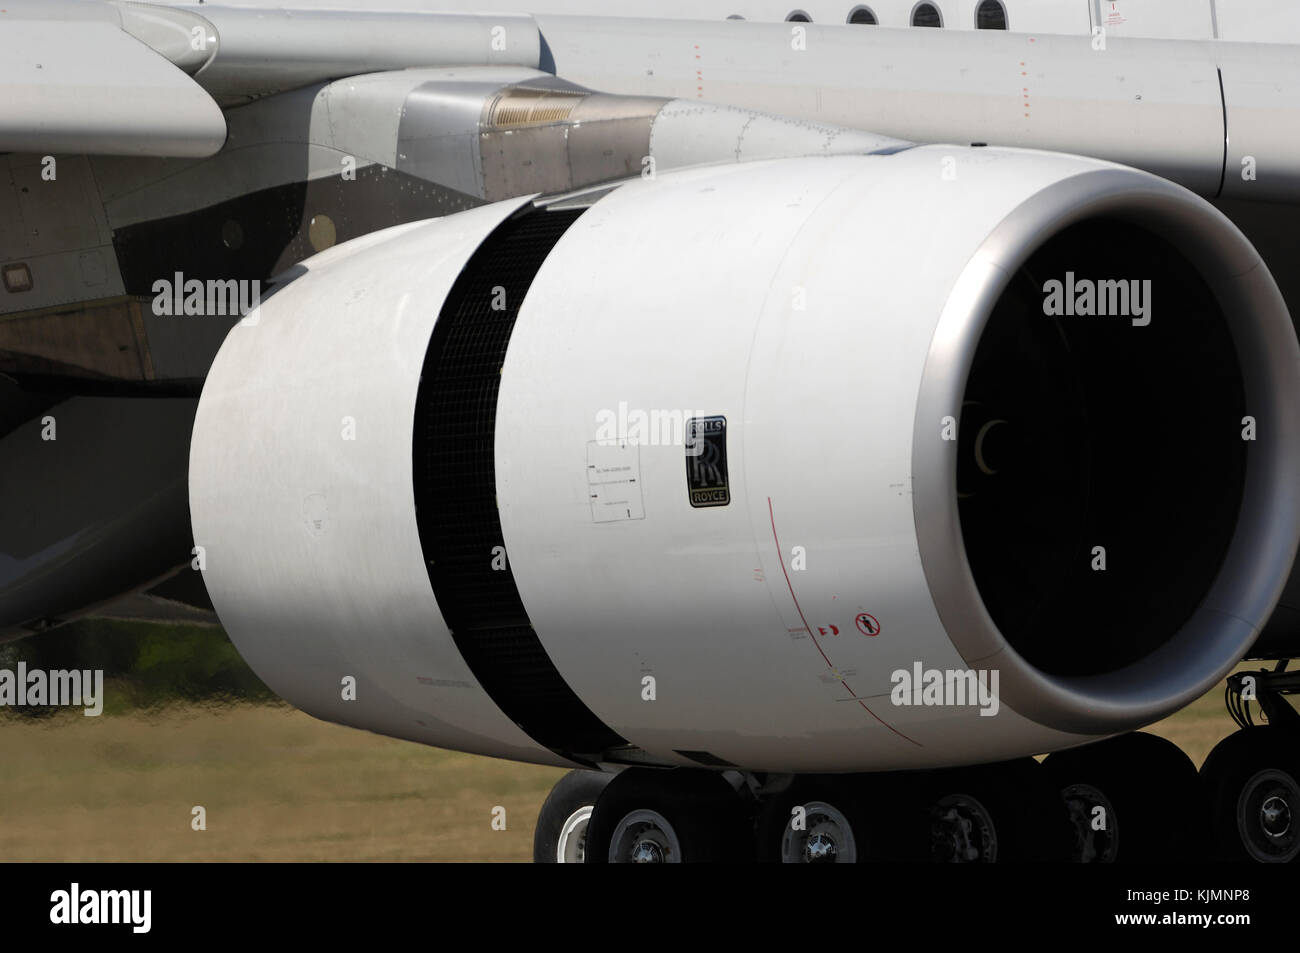 Rolls-Royce Trent 900 engine cowling of the Airbus A380-800 landing at the 2006 Farnborough International Airshow Stock Photo